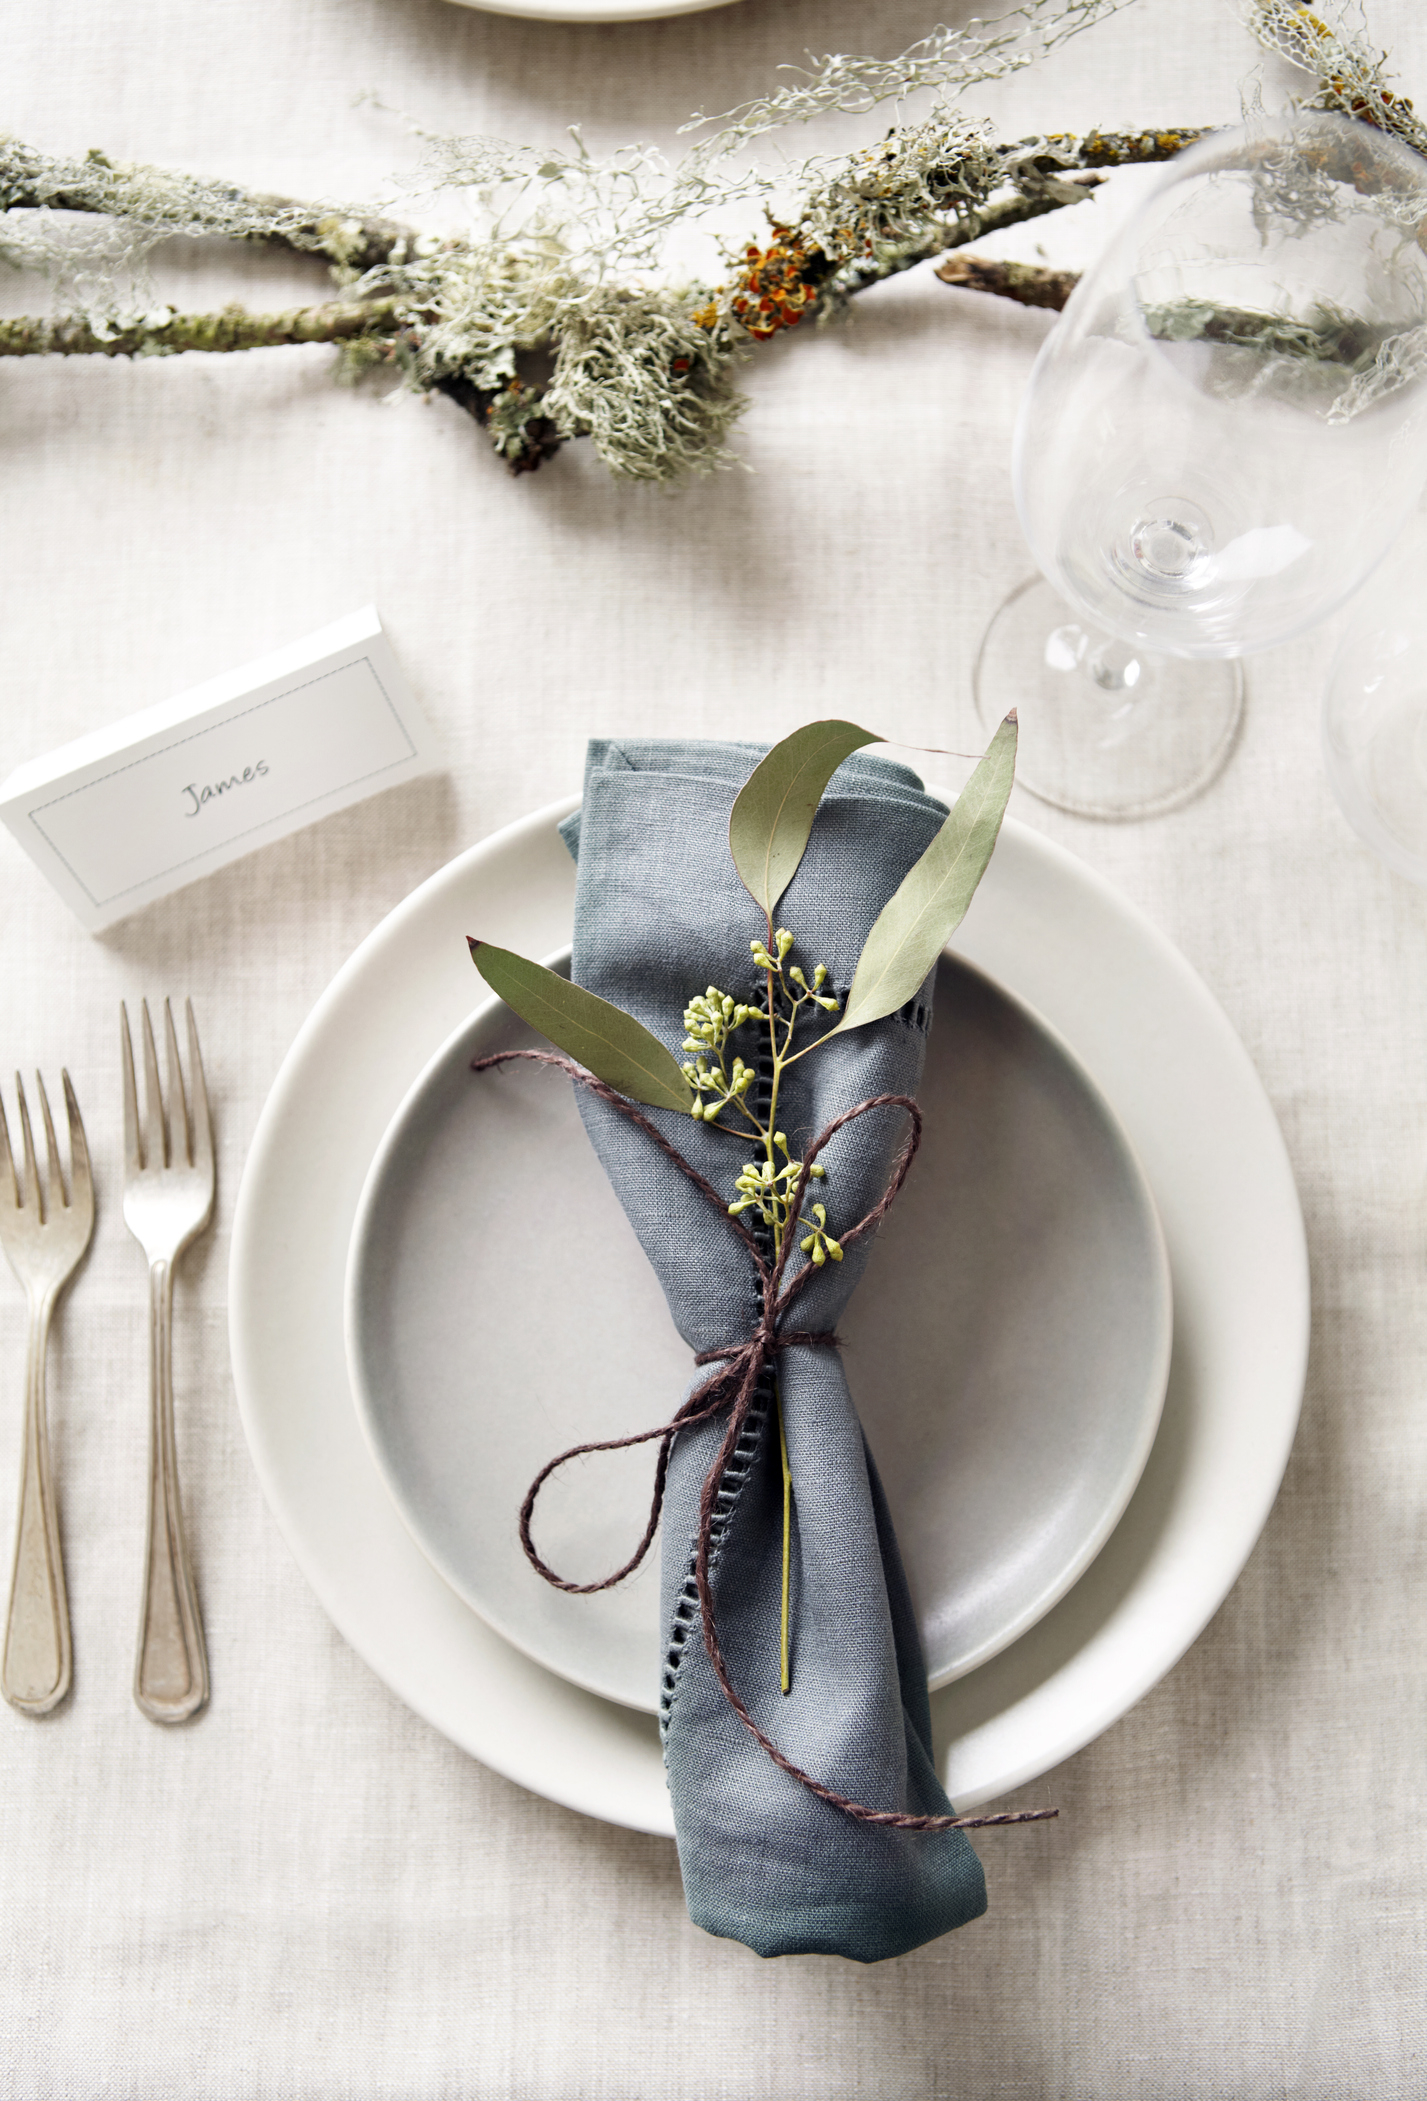 Linen on a place setting